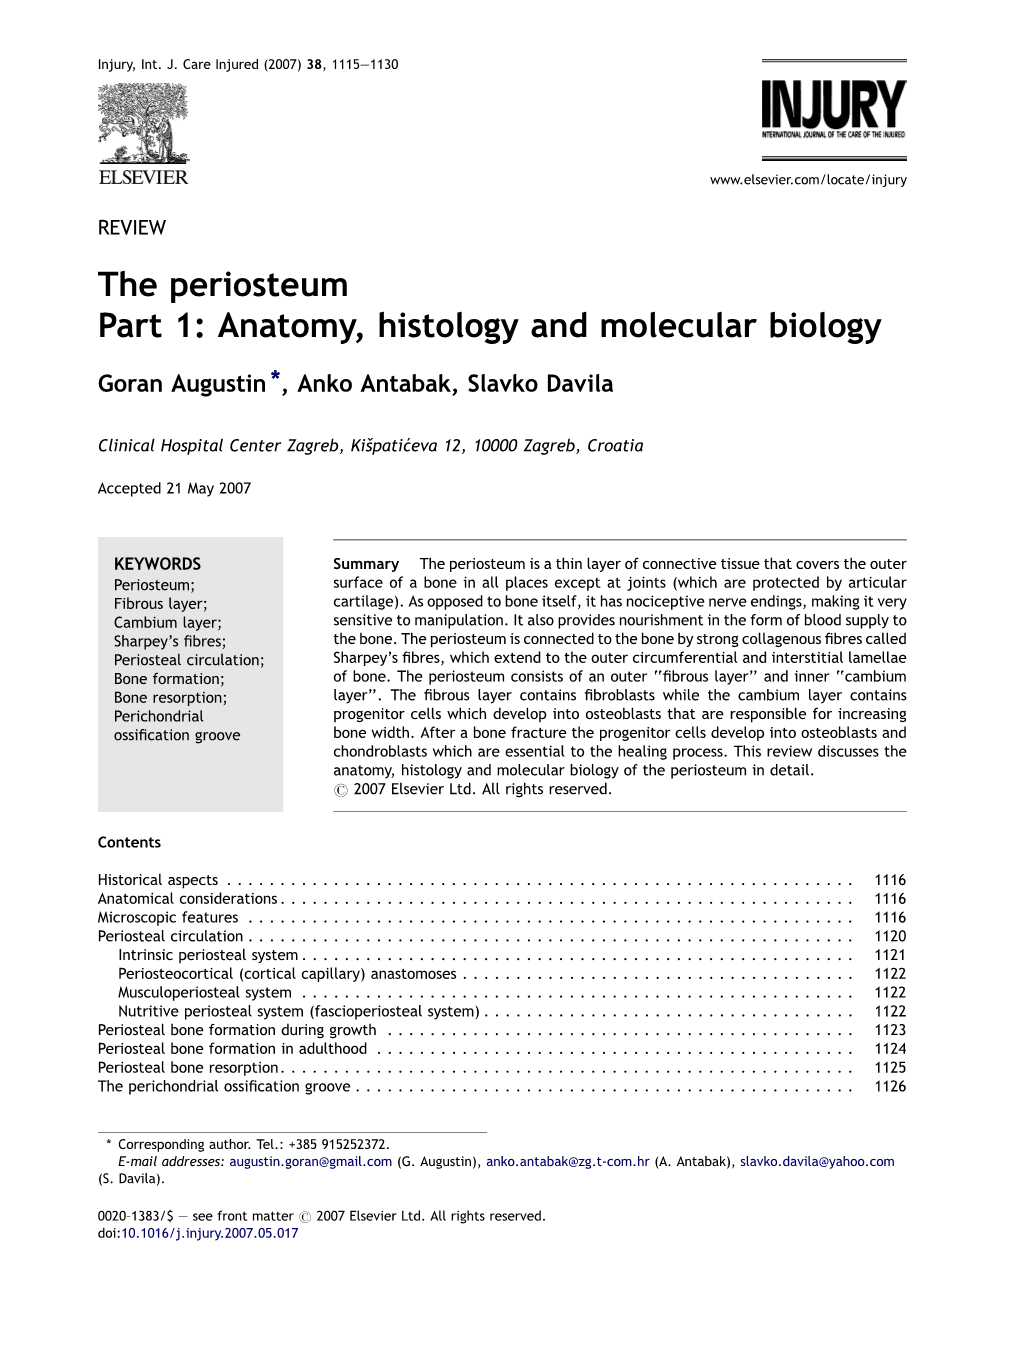 The Periosteum Part 1: Anatomy, Histology and Molecular Biology